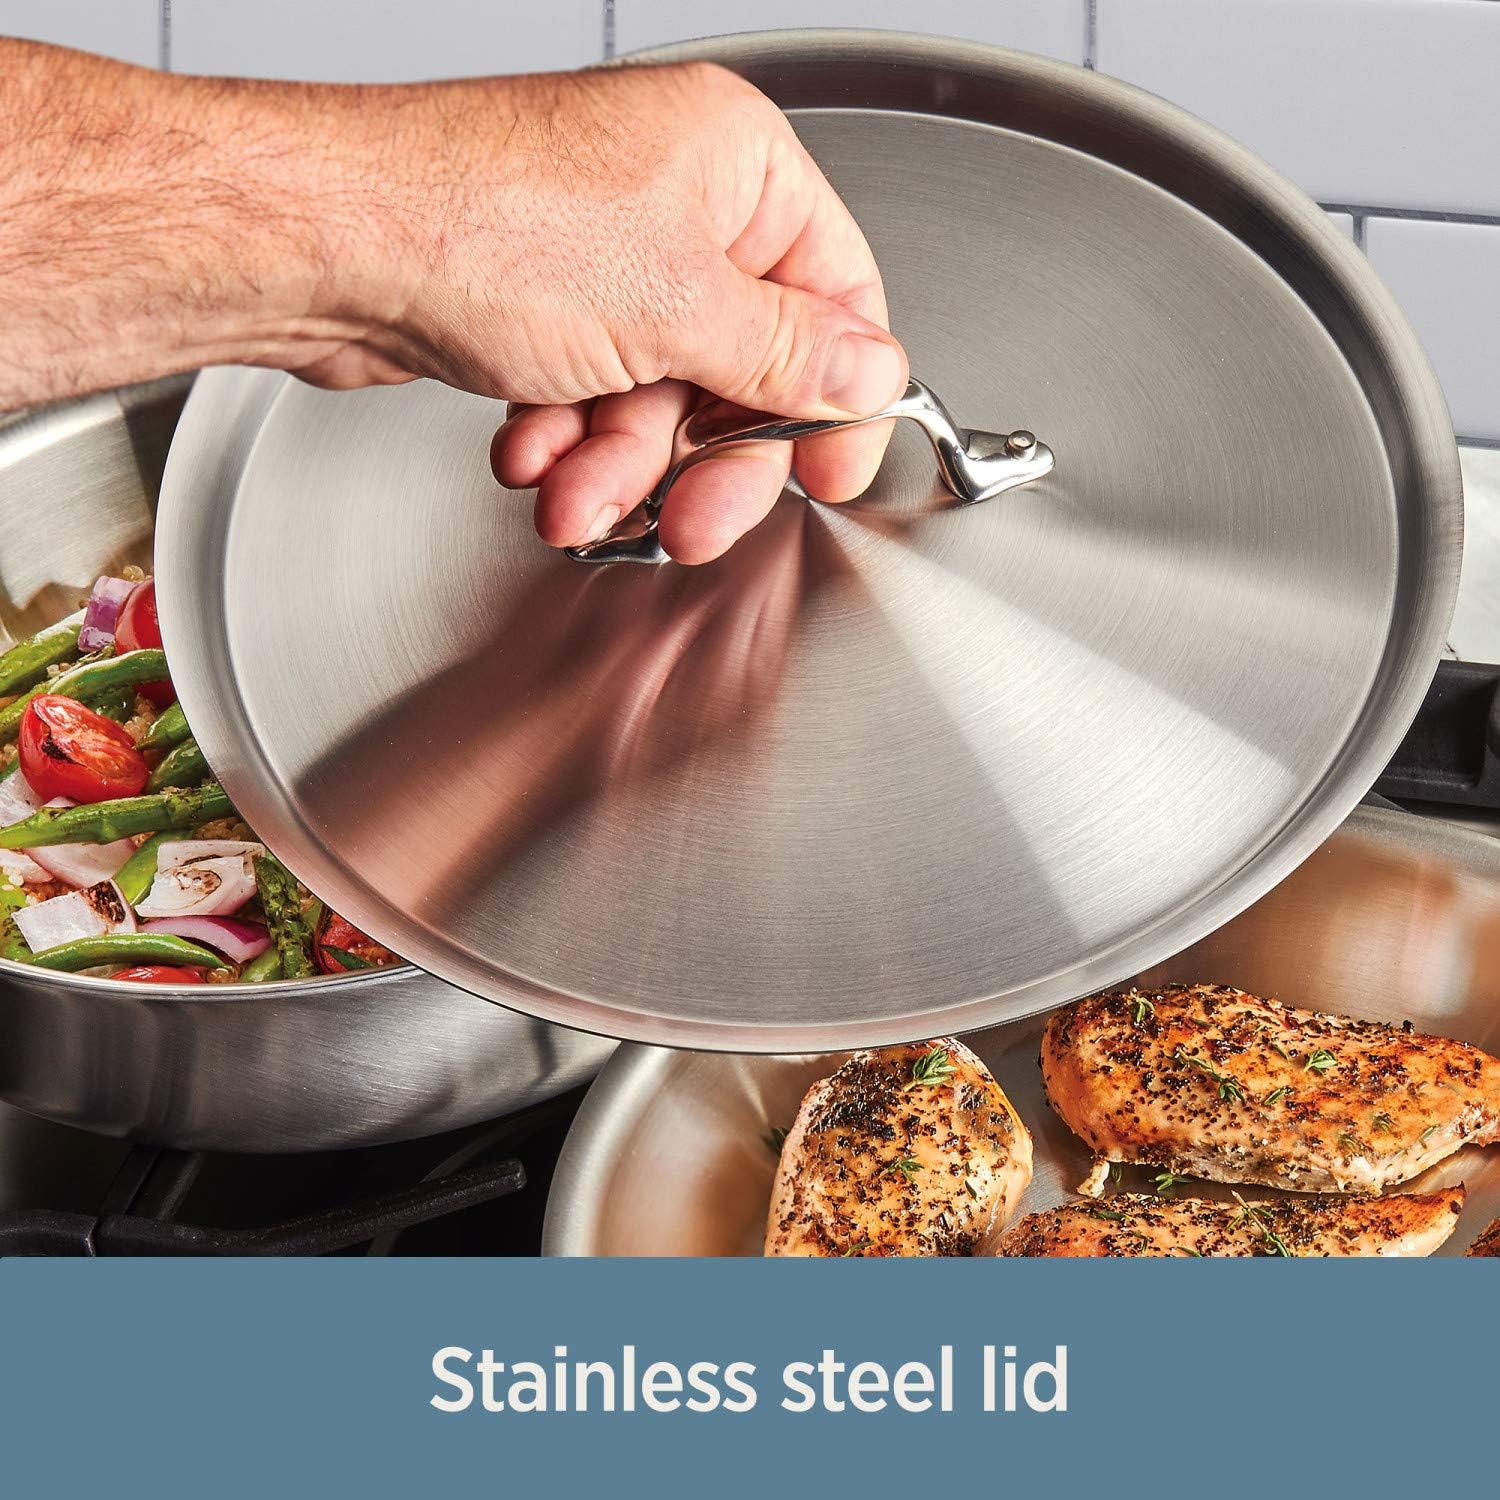 All-Clad All Clad Stainless Steel 3.5 Quart Sauce Pan with Lid